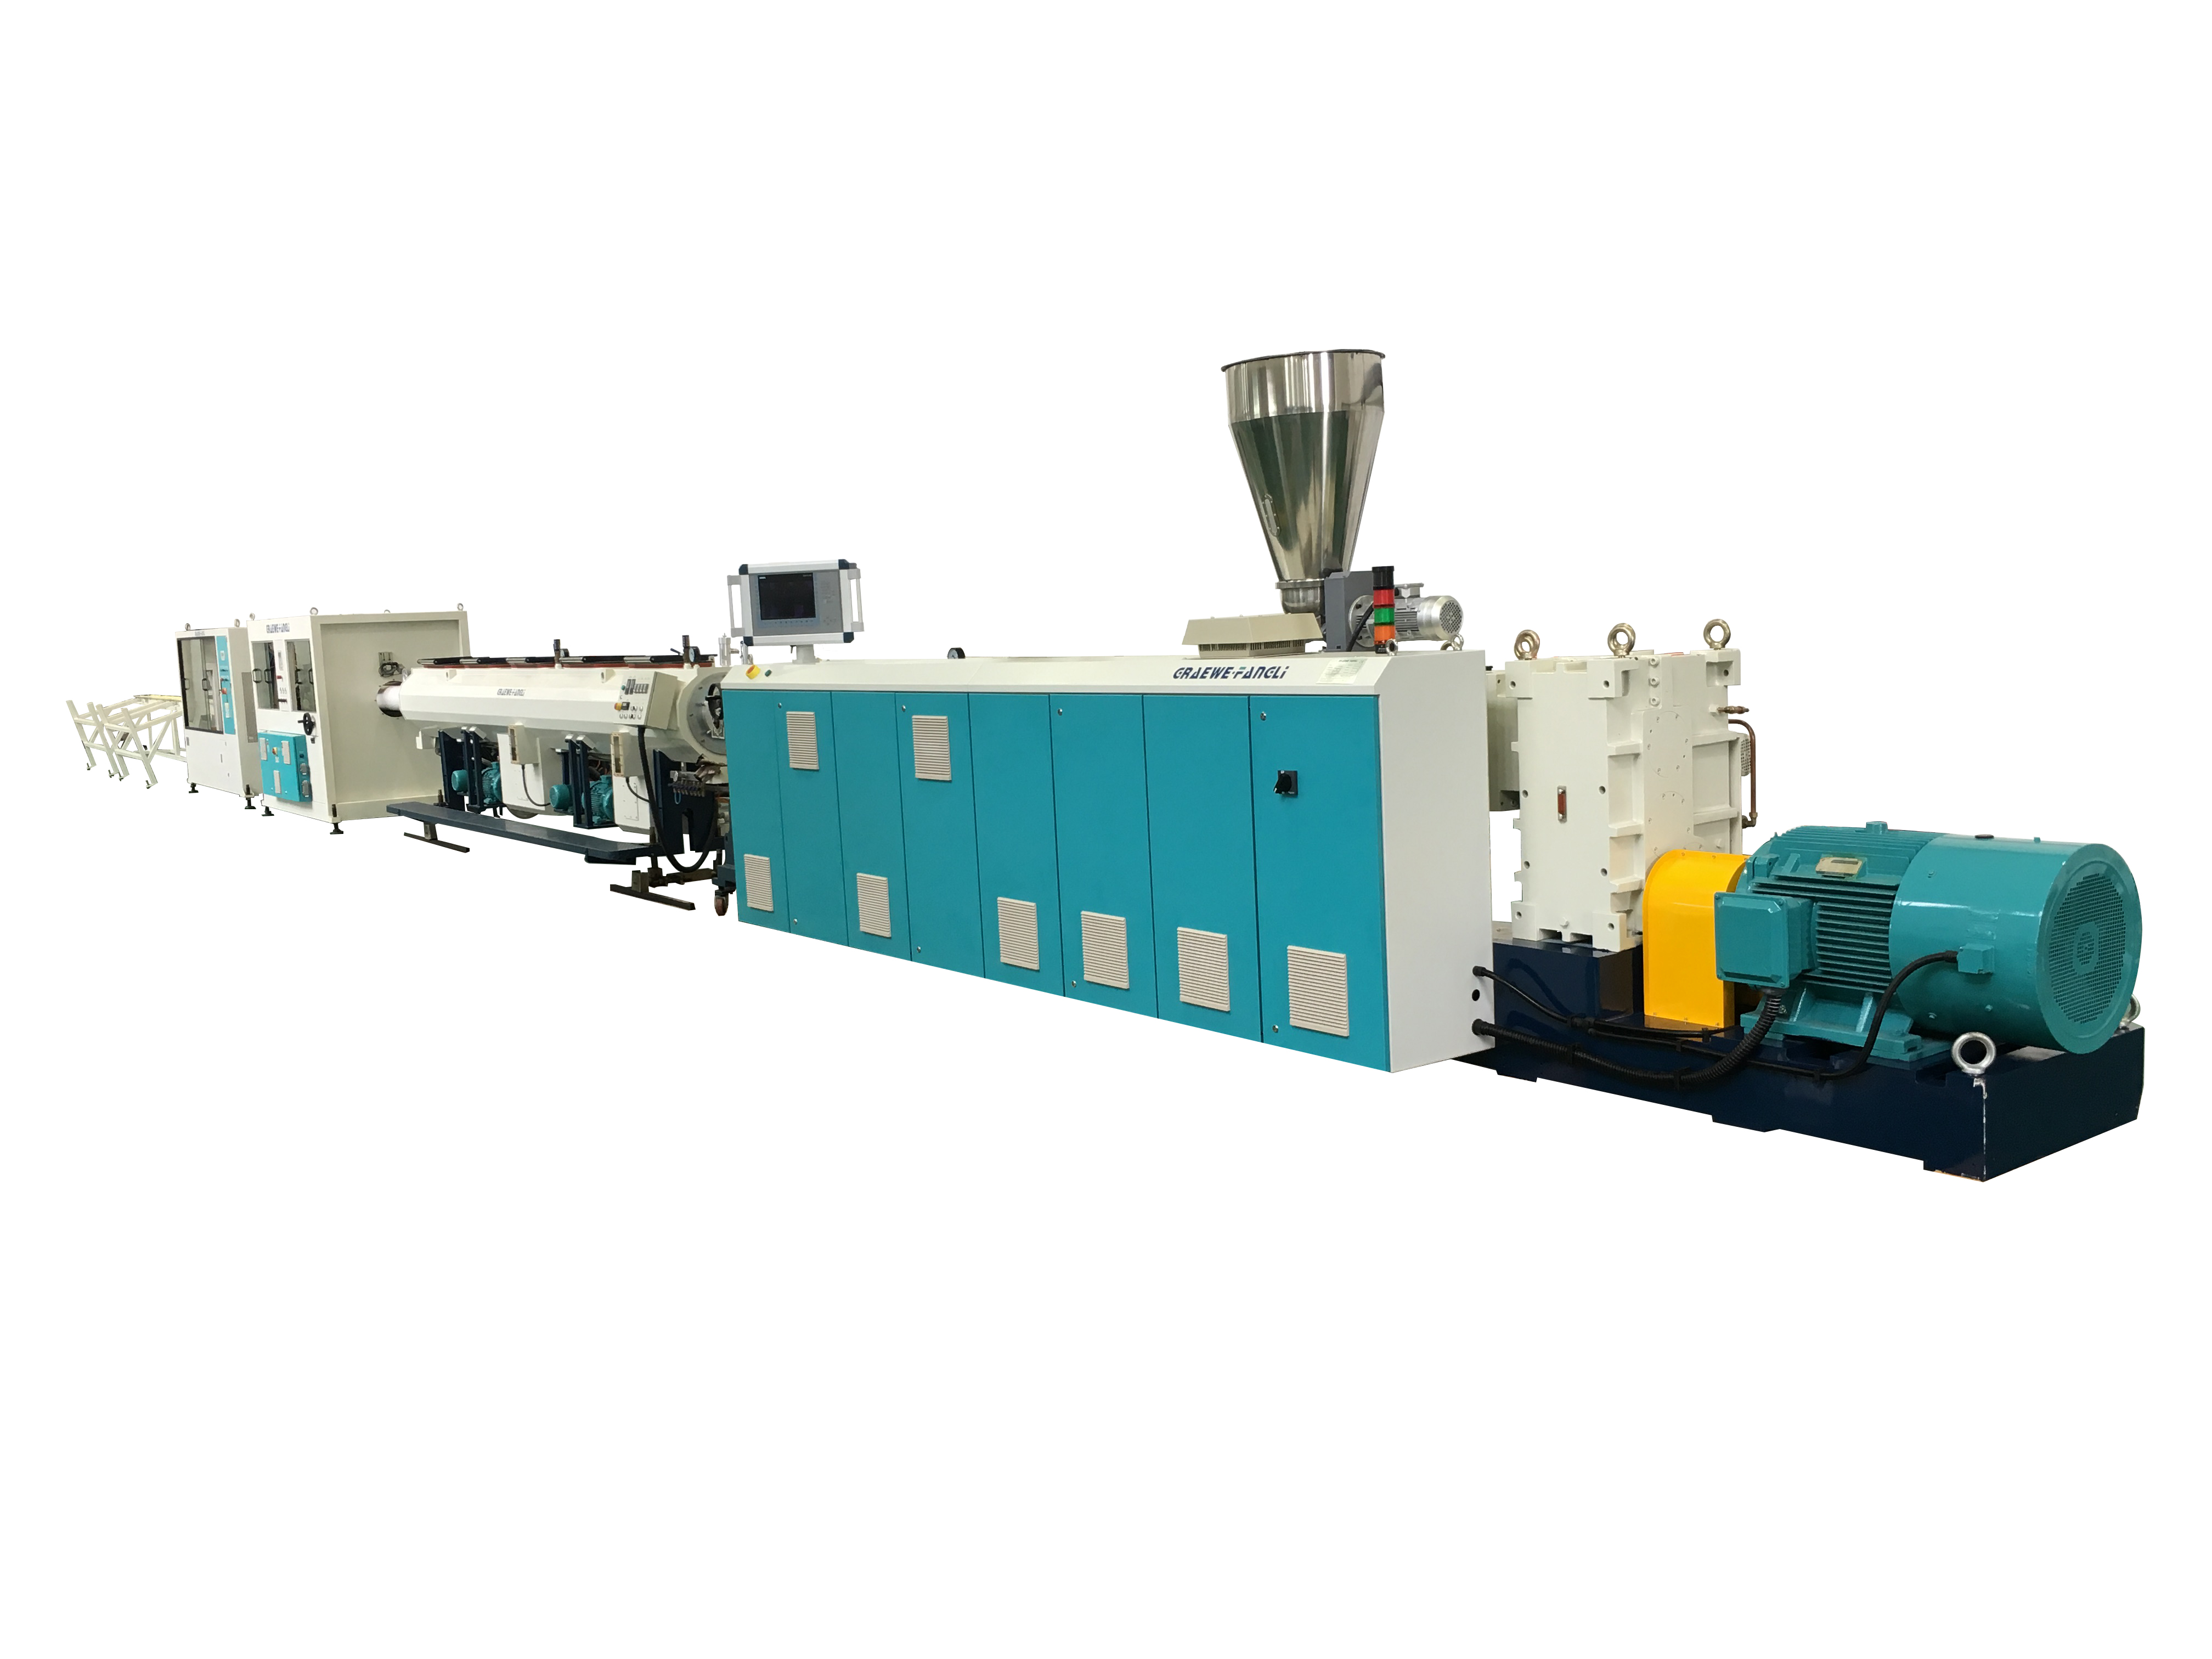 Composition and Function of PVC Pipe Extrusion Production Line